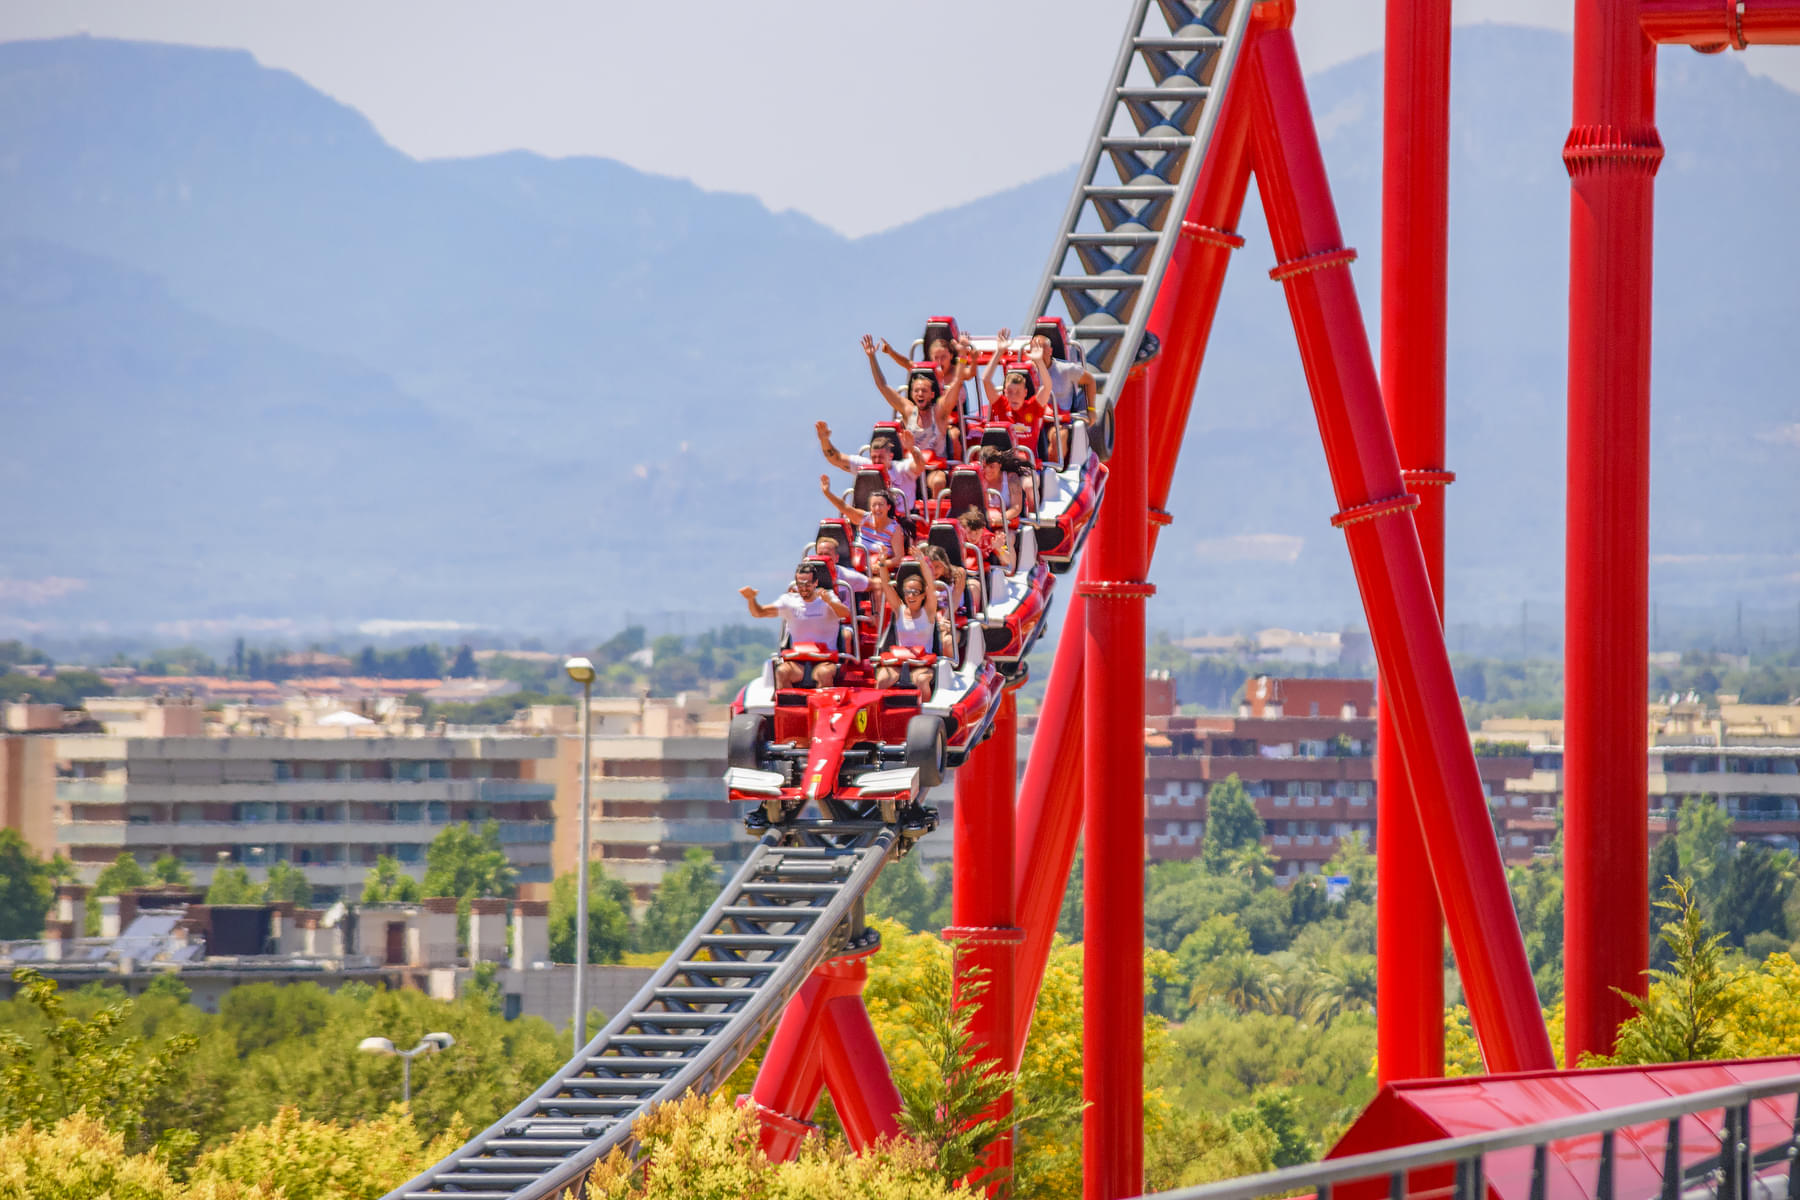 Sit on the thrilling roller-coaster ride of Formula Rossa